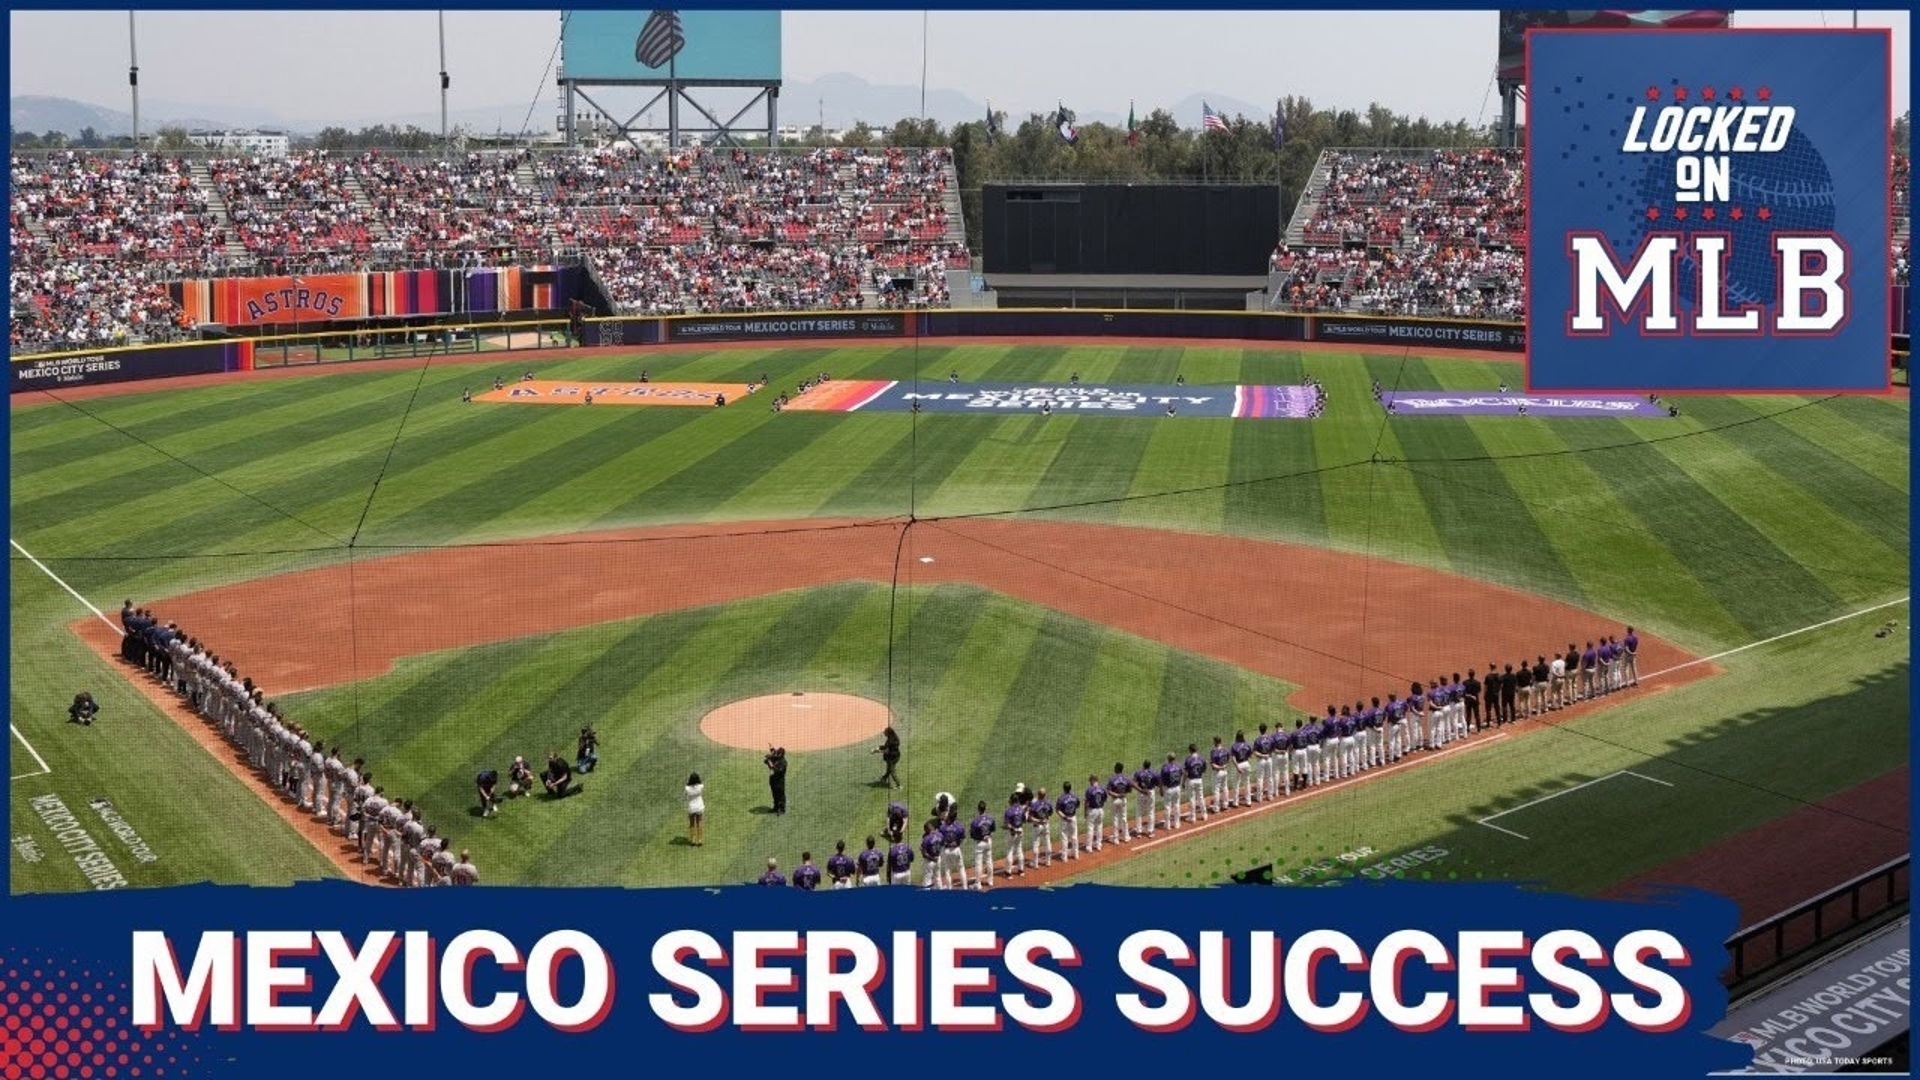 The Mexico Series was a success. Could this mean MLB could expand or move south of the border?

The Astros are getting healthier which could improve their chances.